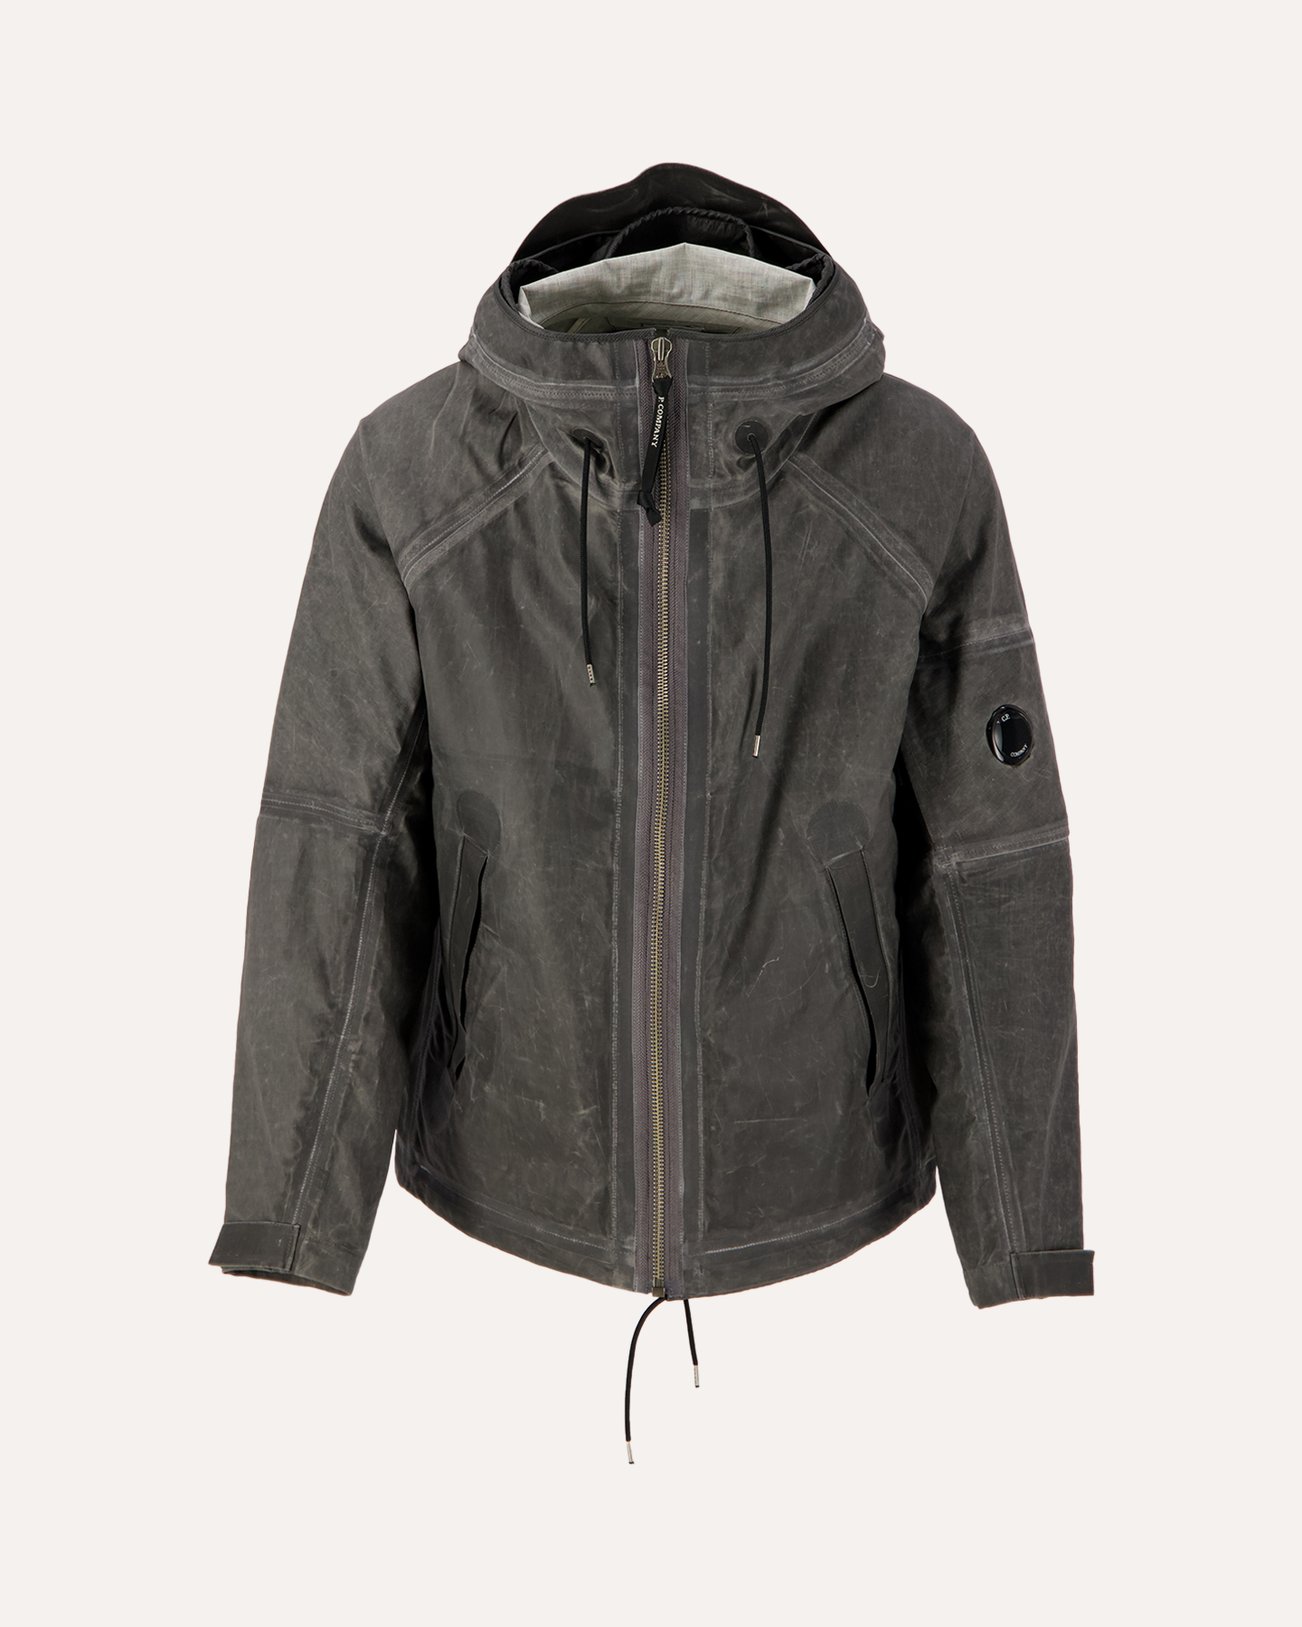 C.P. Company Toob-Two Hooded Jacket GRIJS 1